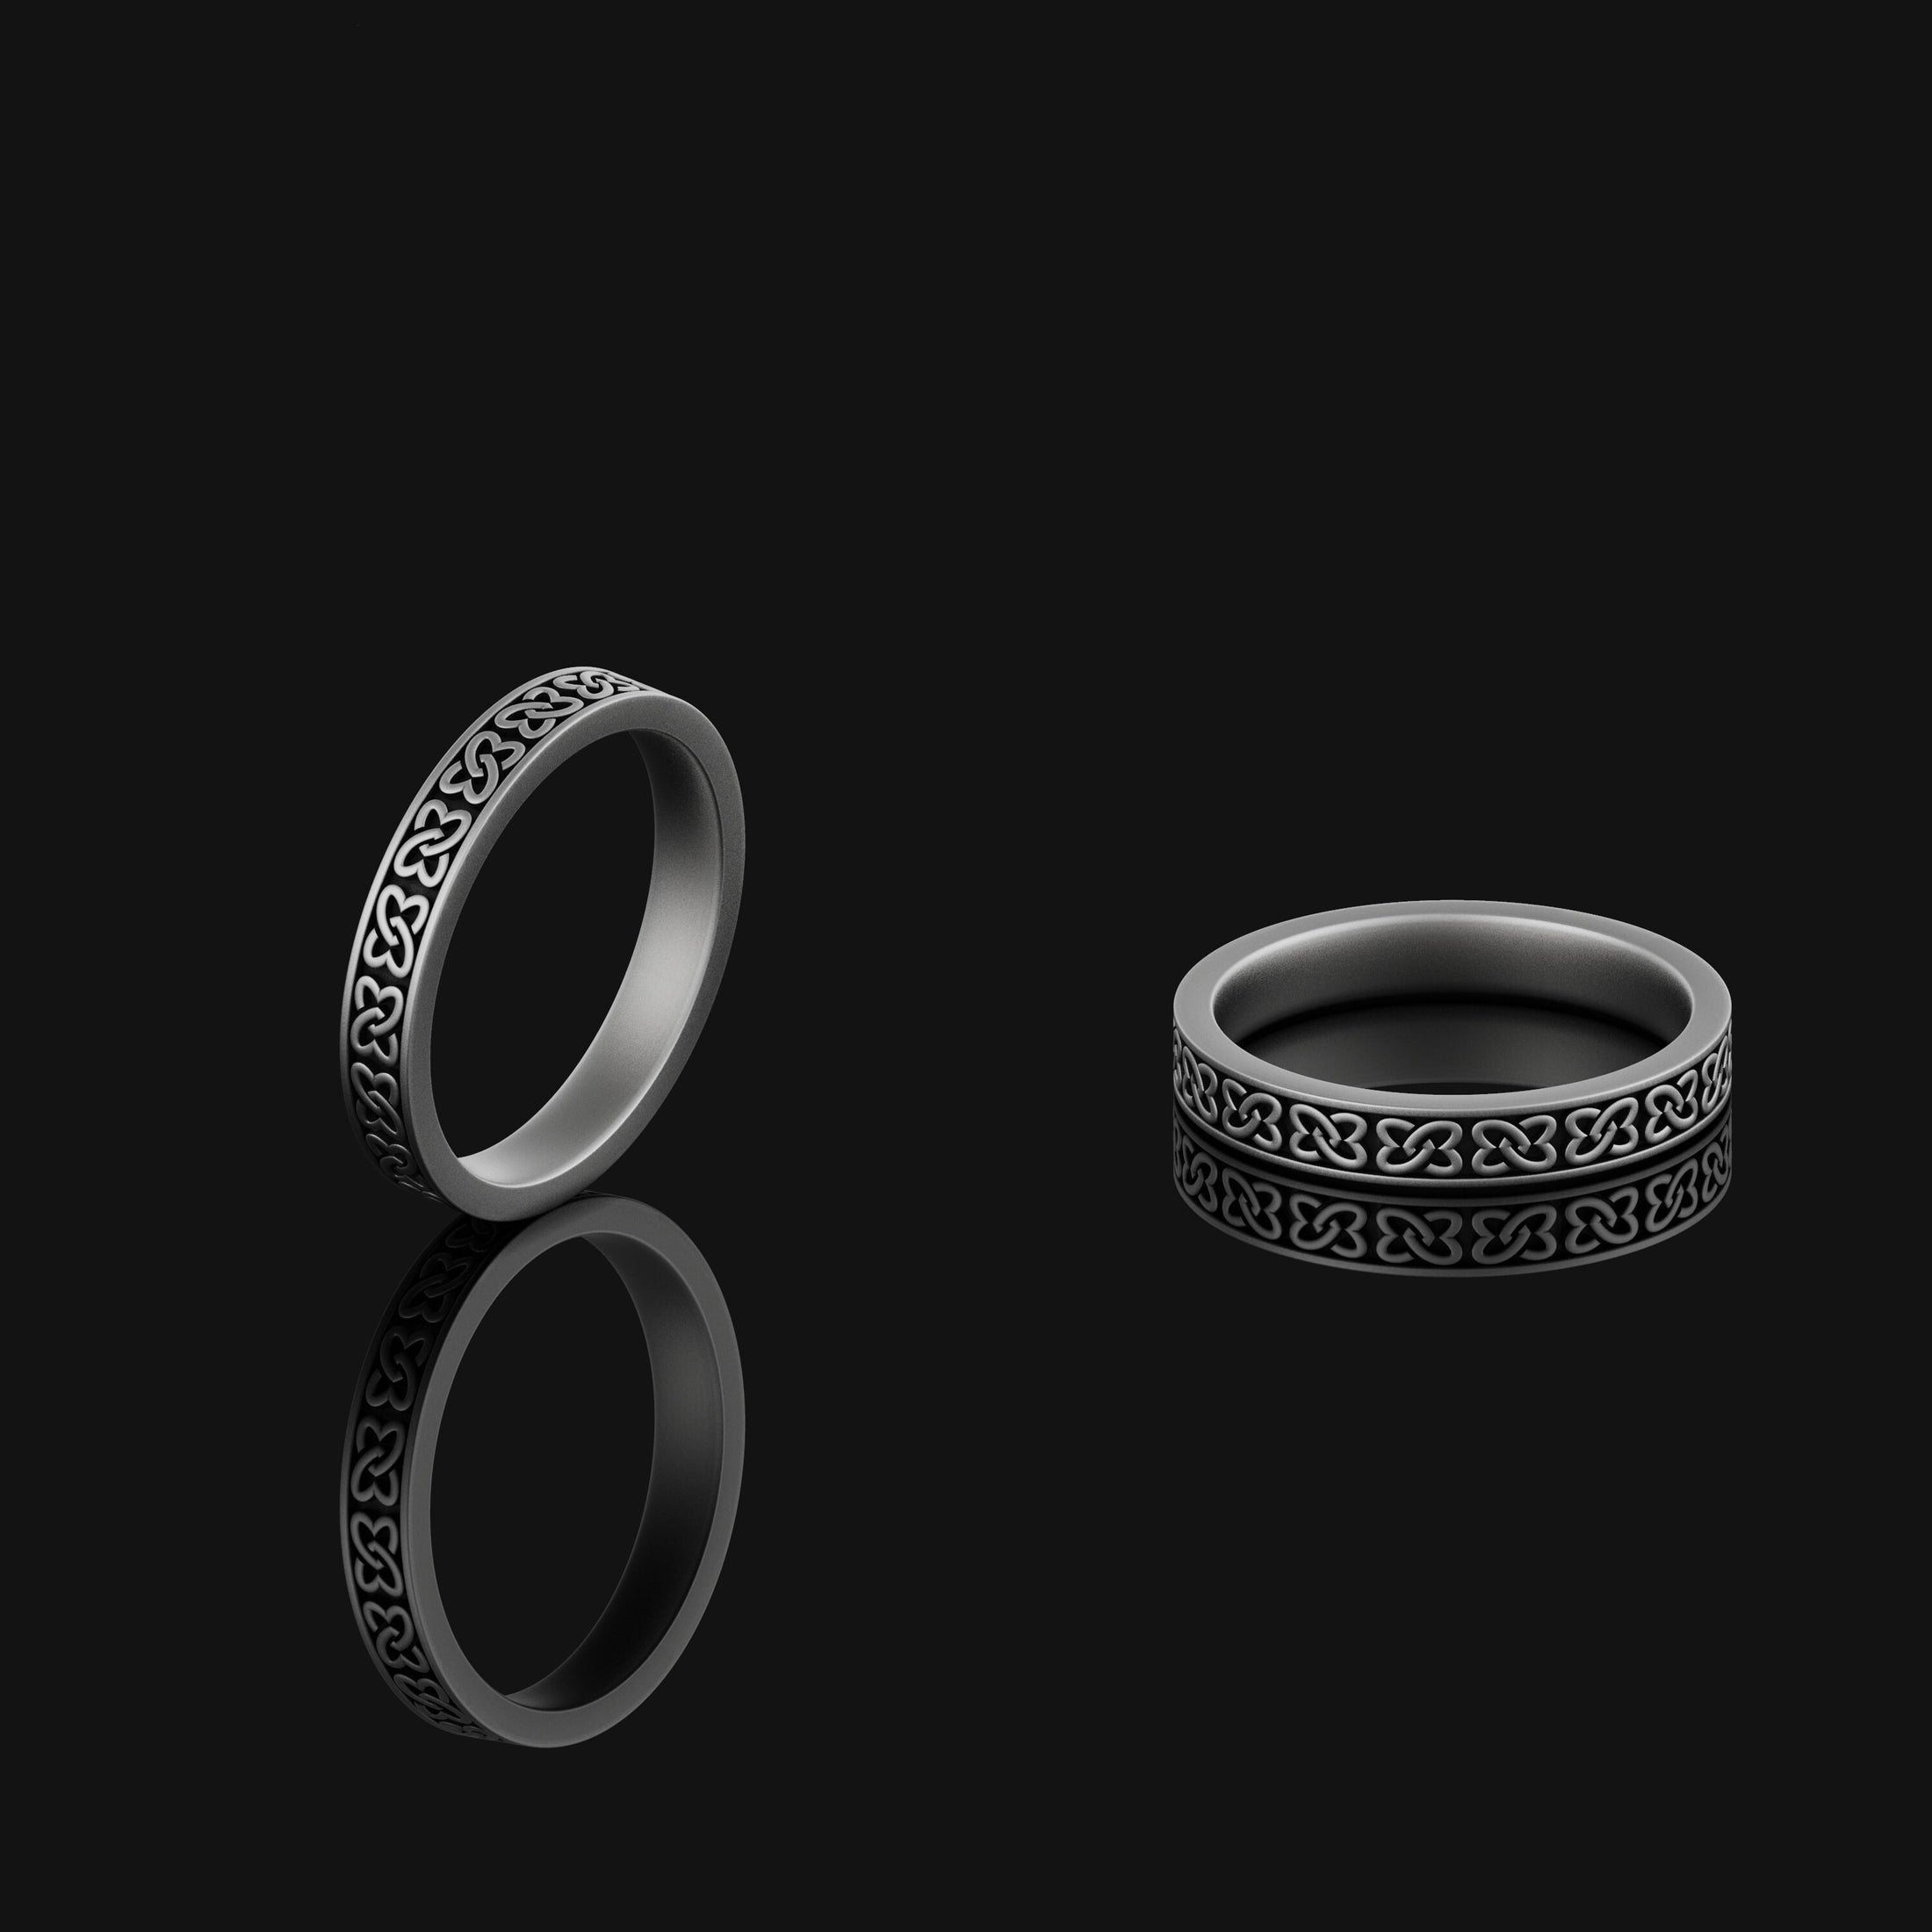 Knot of Love Band - Engravable Oxidized Finish